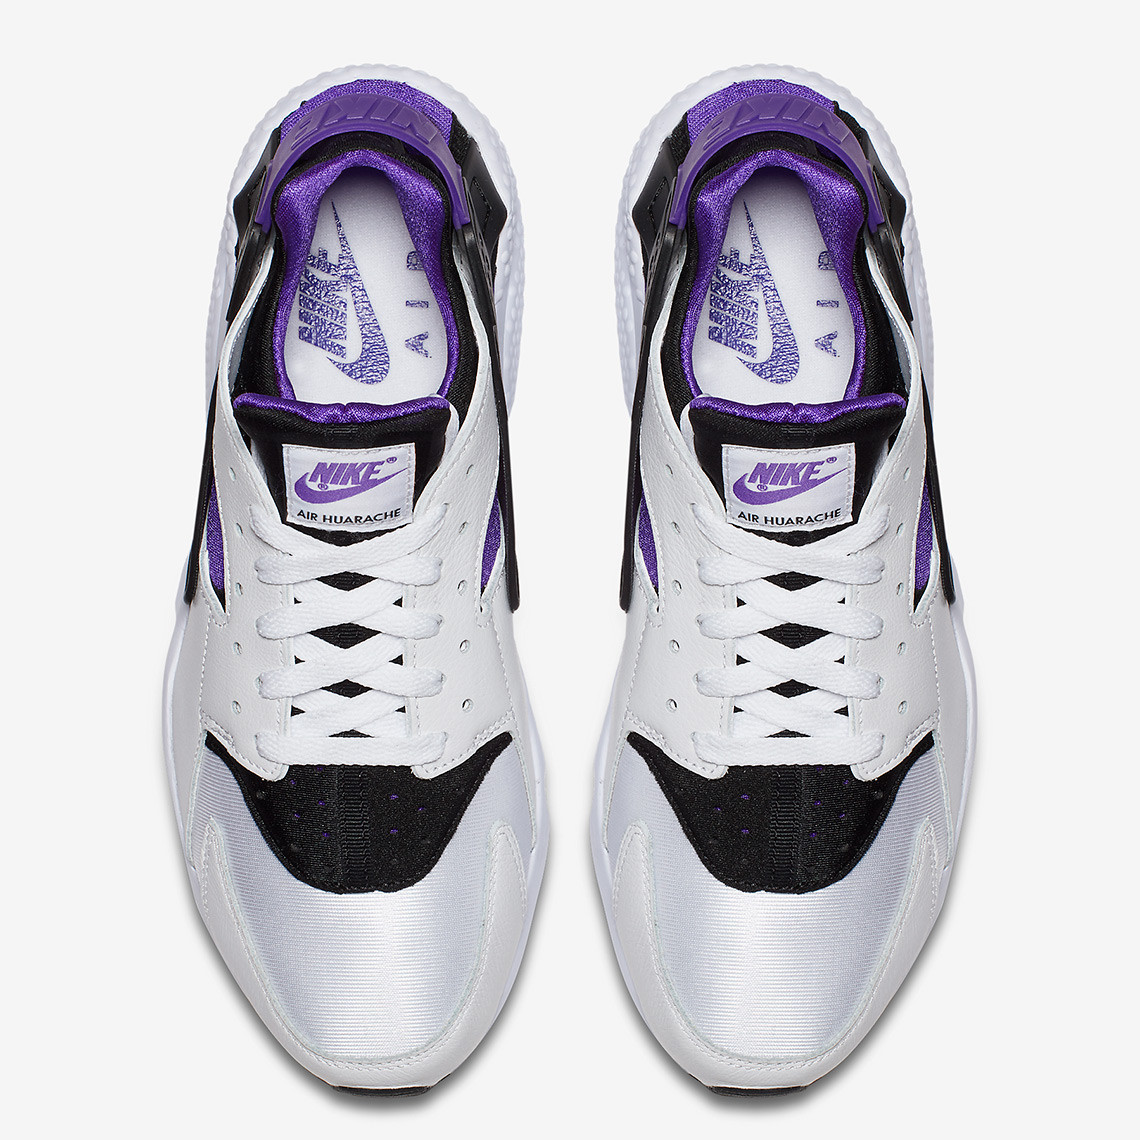 Nike's OG Streak Continues With 1991's Air Huarache “Purple Punch”